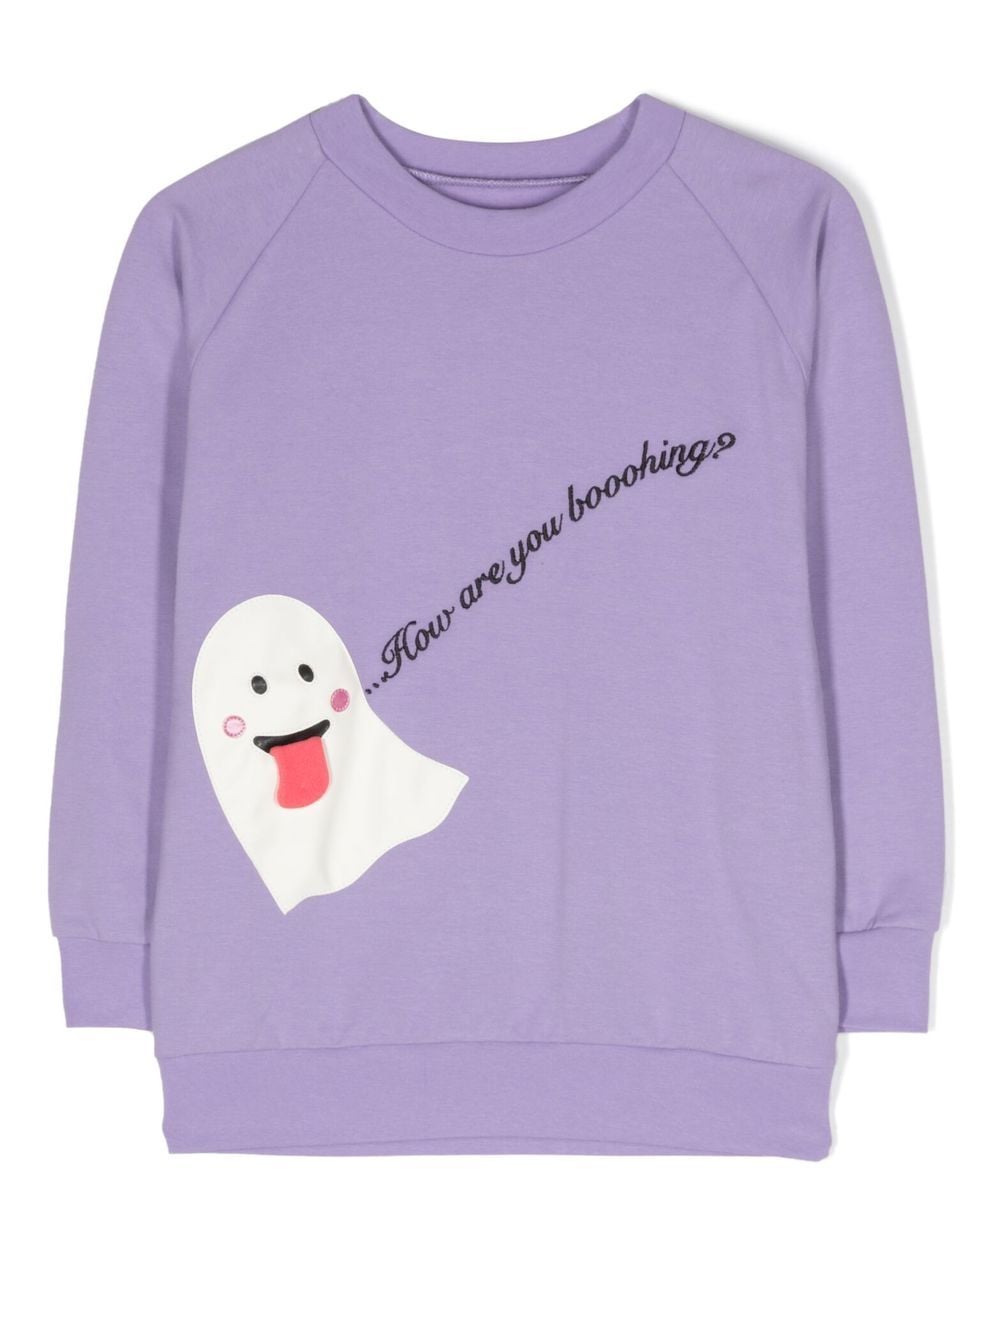 WAUW CAPOW by BANGBANG embroidered graphic-appliqué sweatshirt - Purple von WAUW CAPOW by BANGBANG